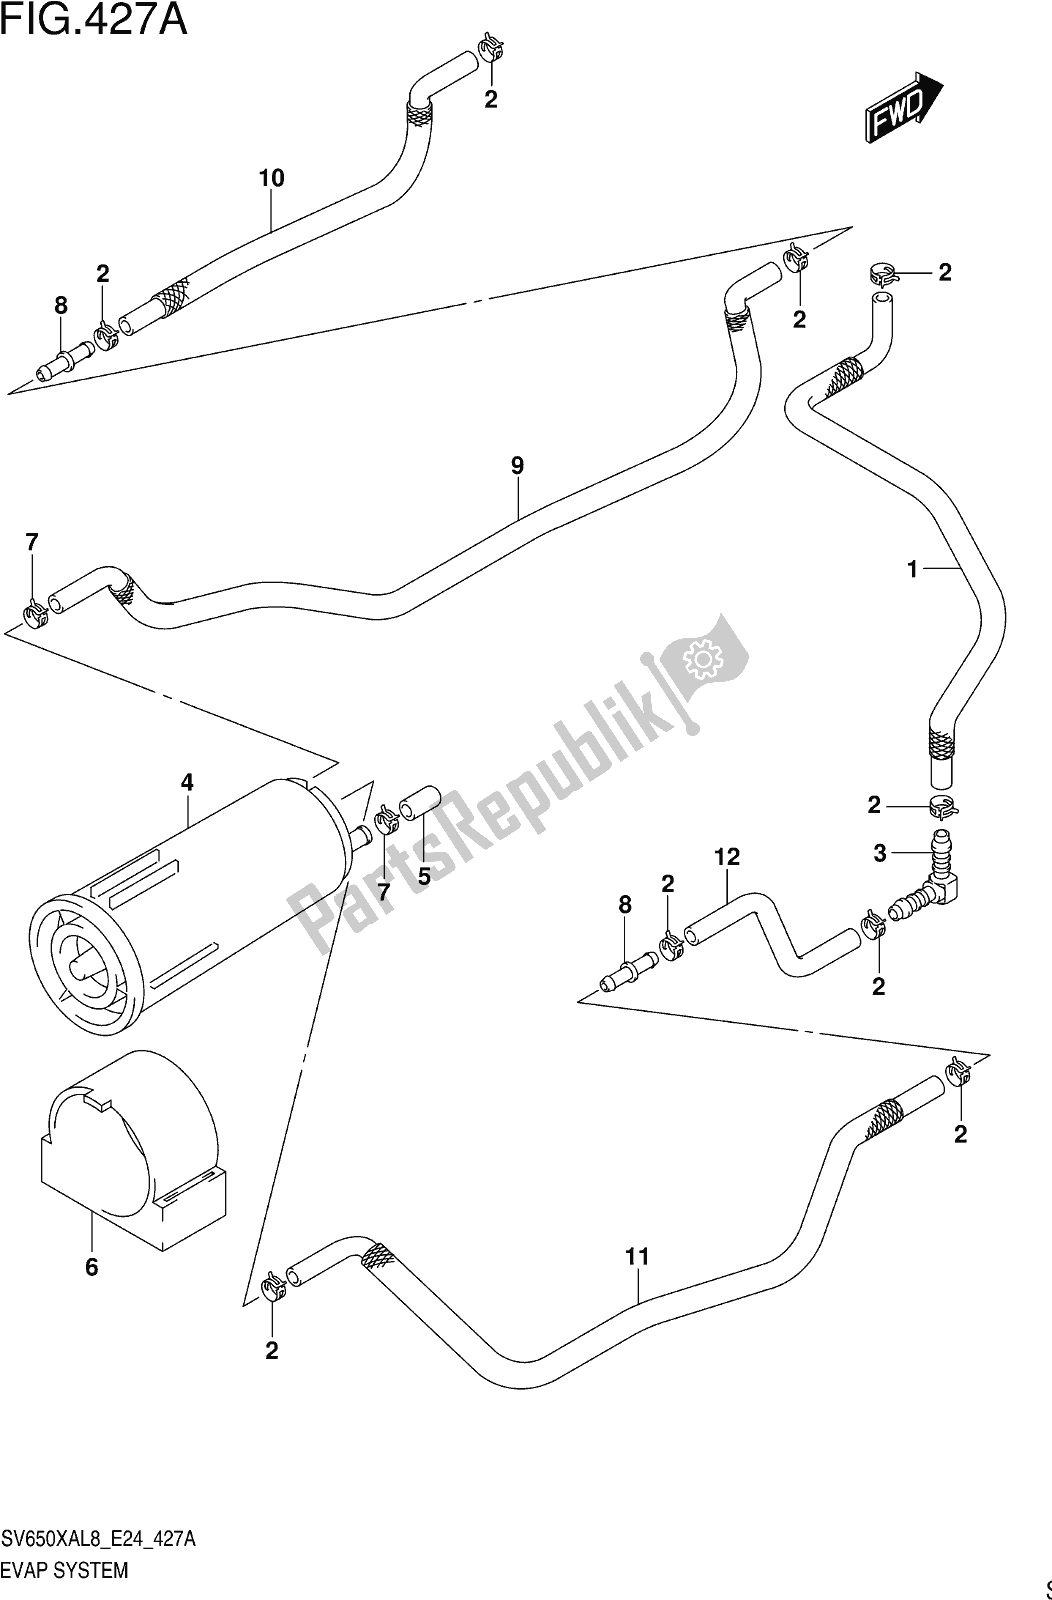 All parts for the Fig. 427a Evap System of the Suzuki SV 650 XA 2018